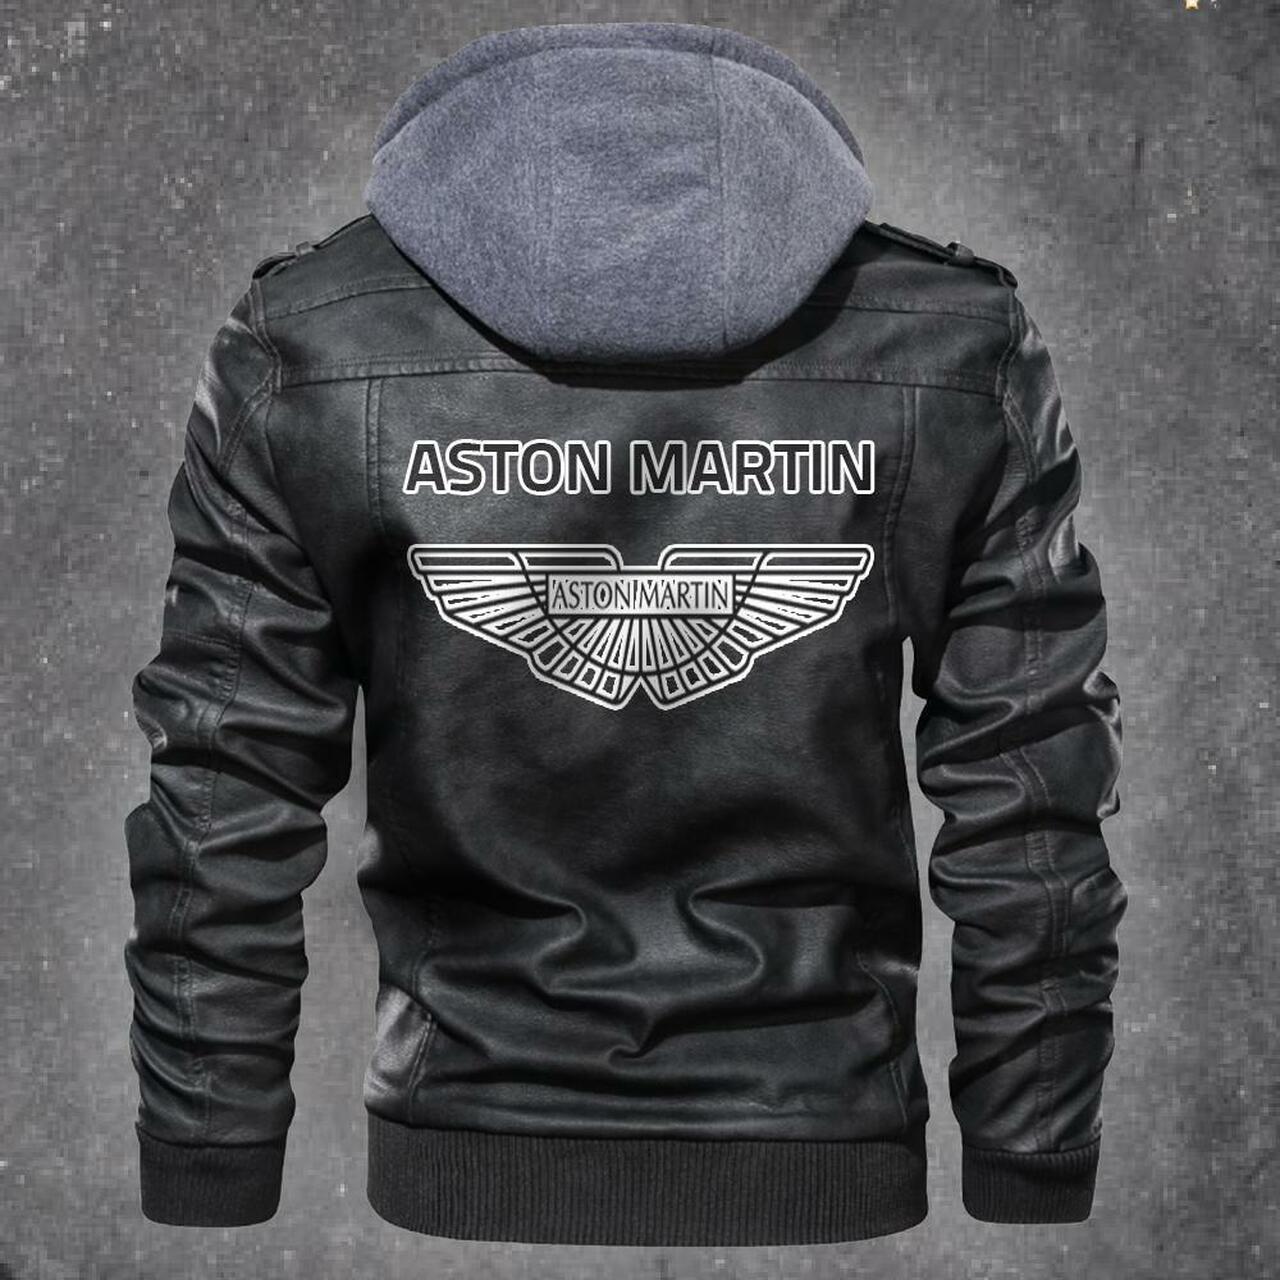 You can find Leather Jacket online at a great price 156